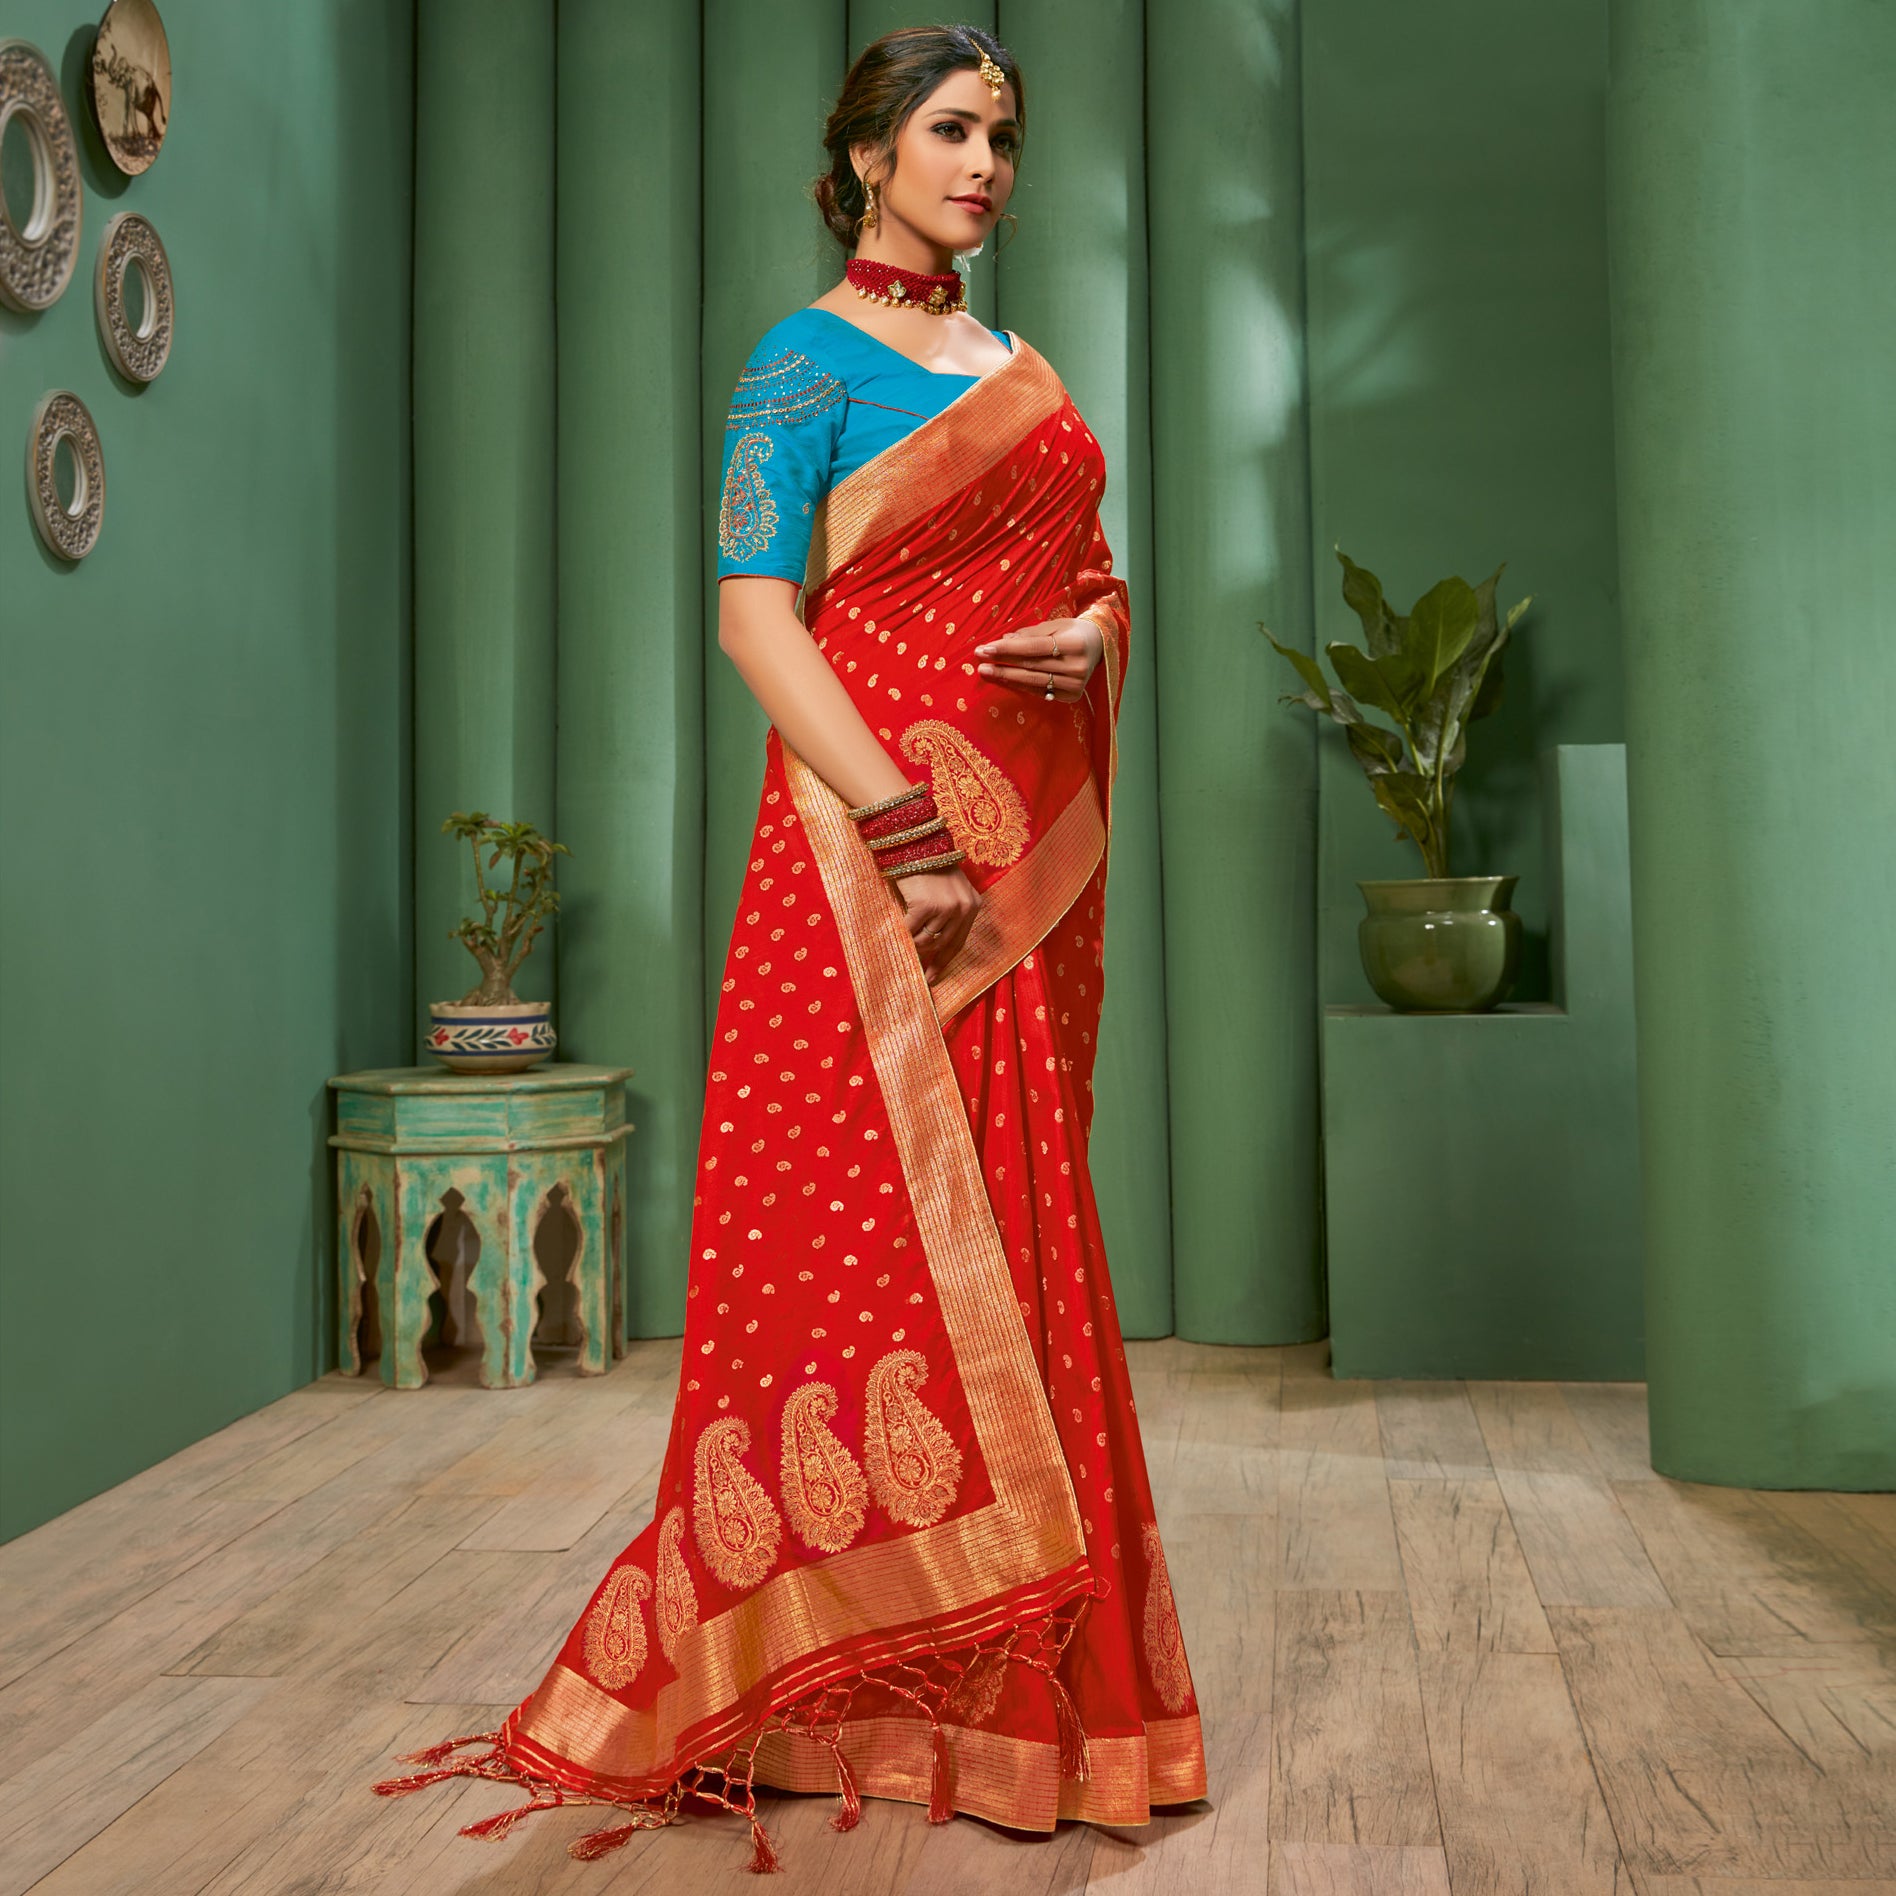 Red Paisley Pattern Zari Jacquard Bordered Art Tusser Silk Saree with Two Blouses - Fabcurate